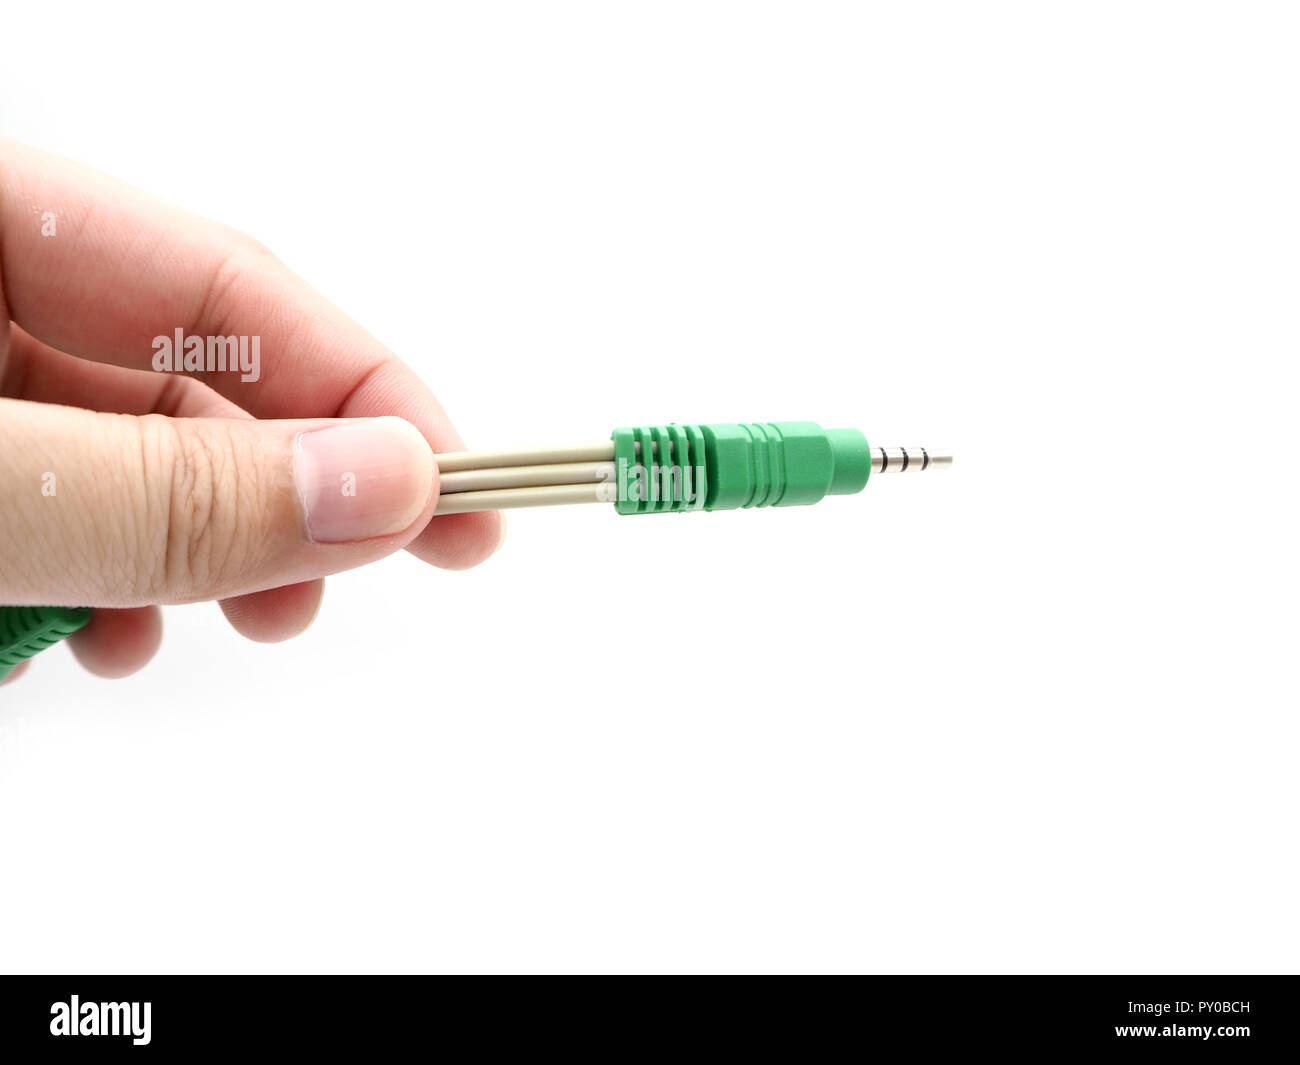 Hand holding a jack instrument cable isolated on a white background. Stock Photo